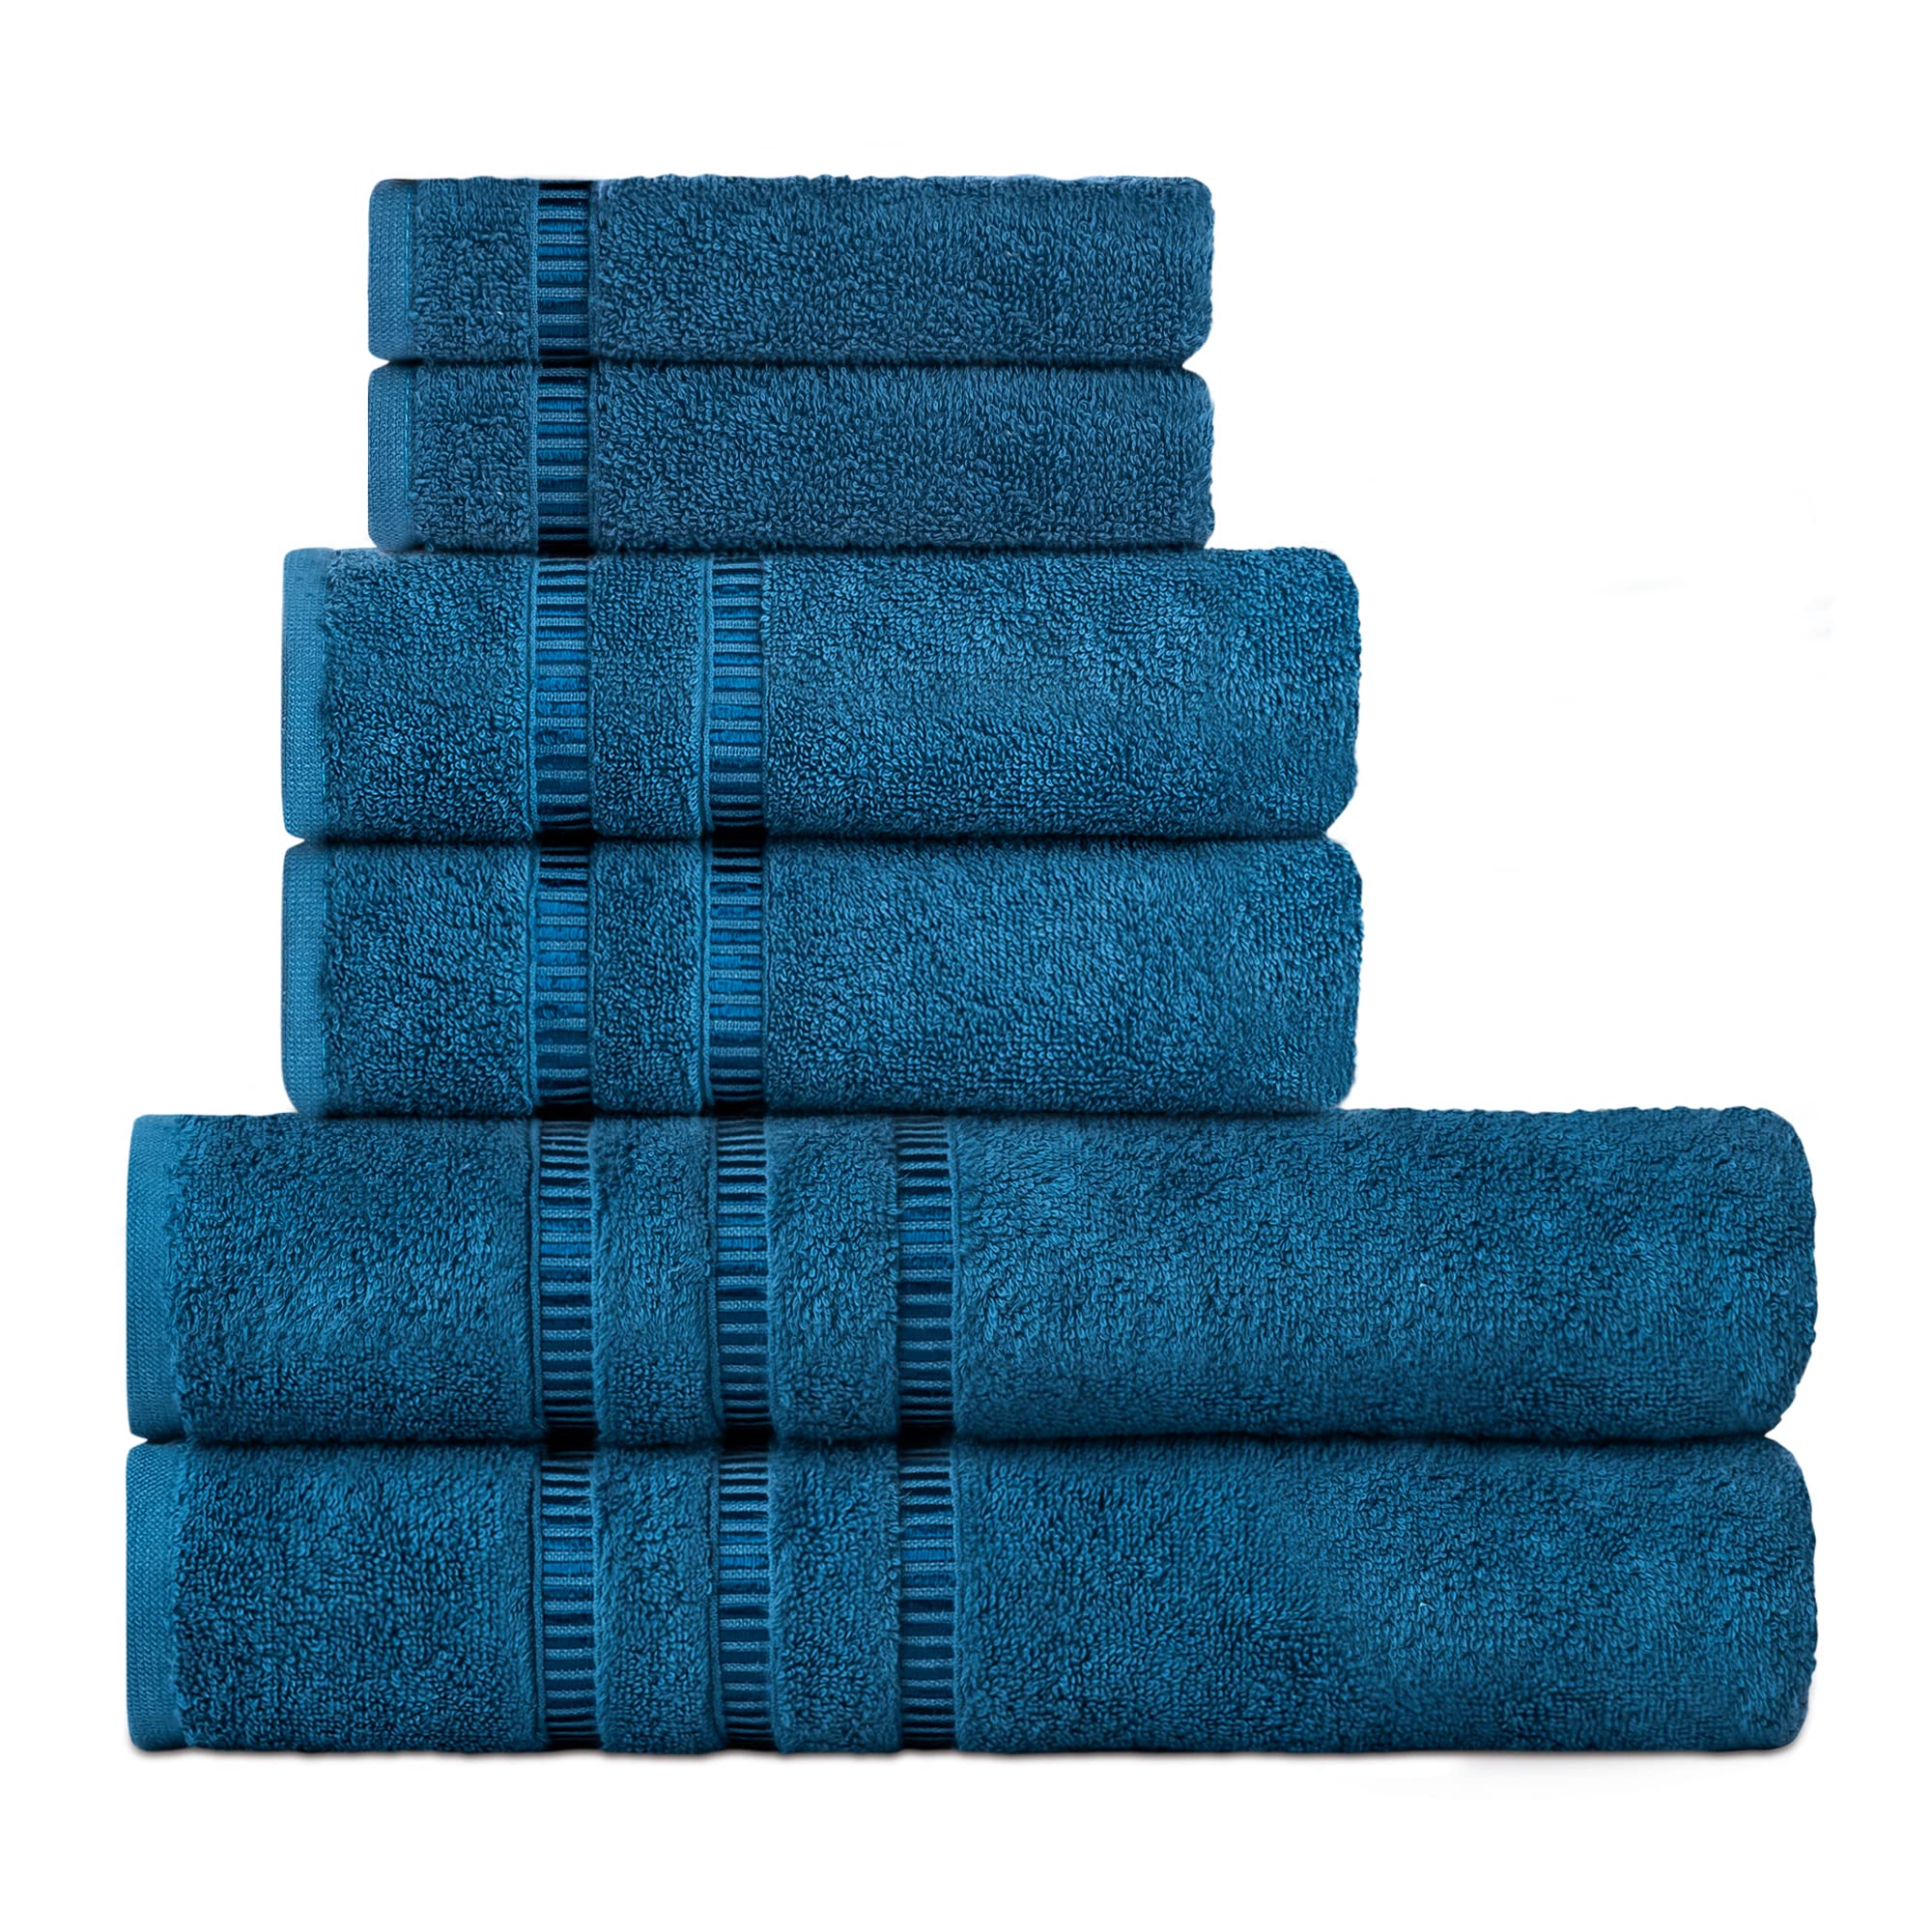 2PCS 100% Cotton Thickened High Quality Face Towel White Blue Extra Large  Bathroom Towel High Absorbent Shower Hotel Towel Set